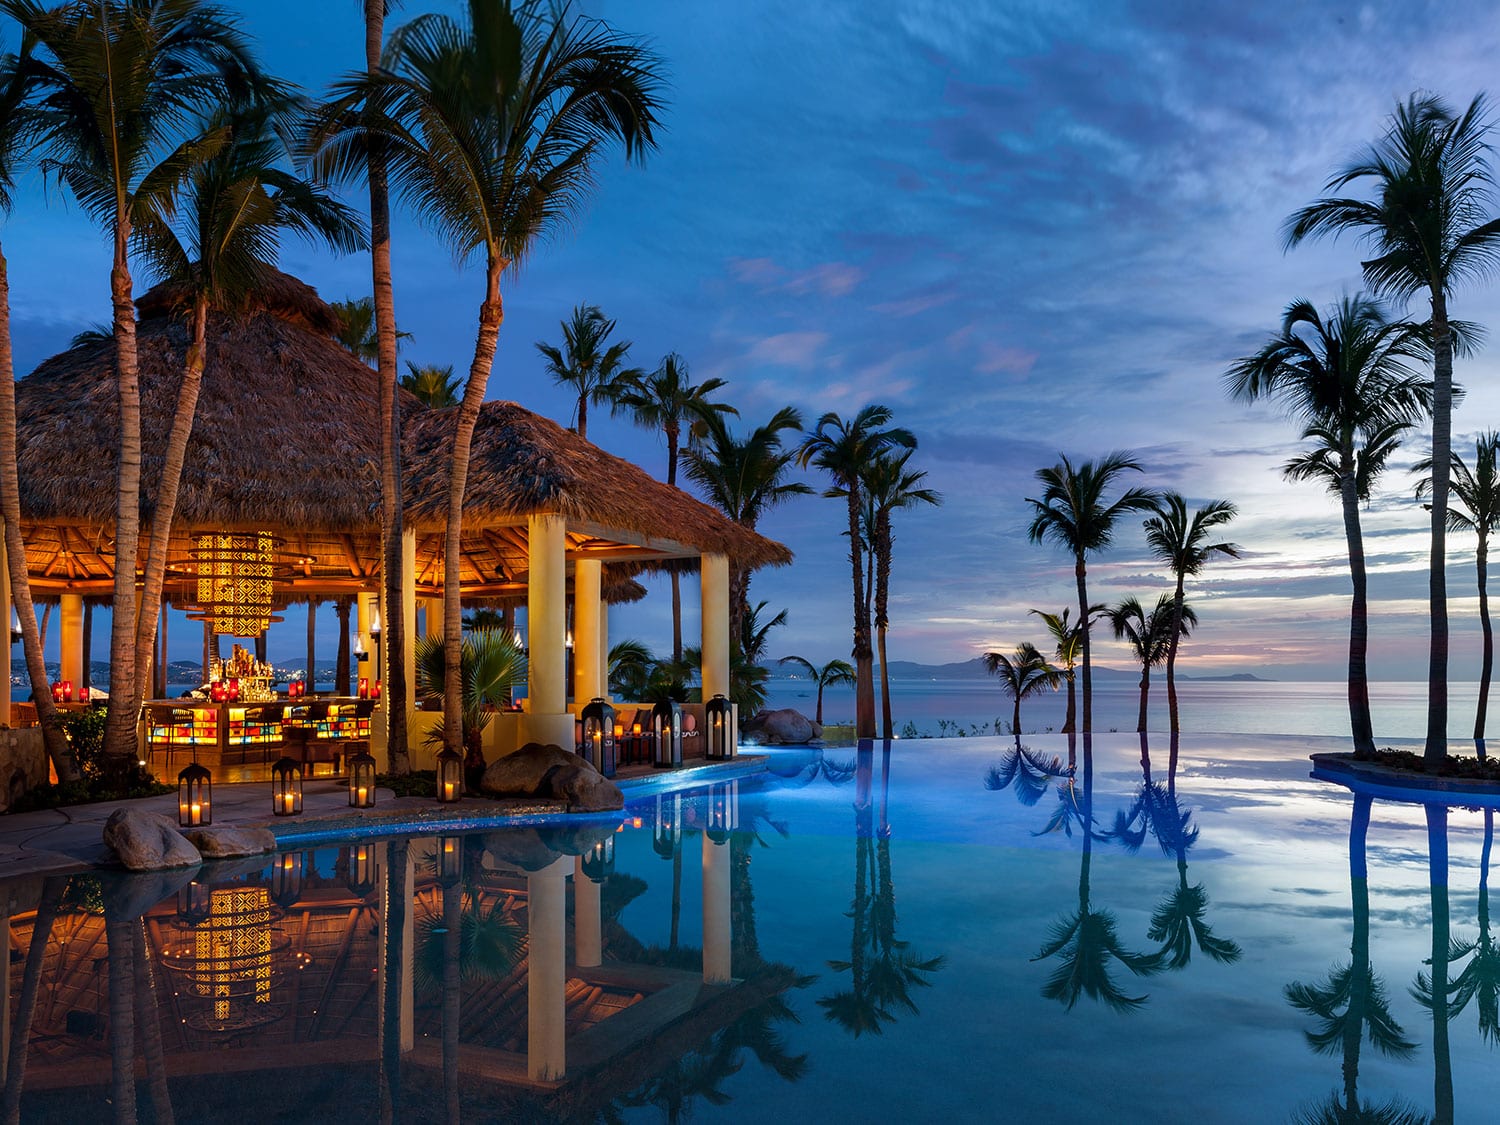 A luxury resort style pool by the ocean and a lit up pagoda.